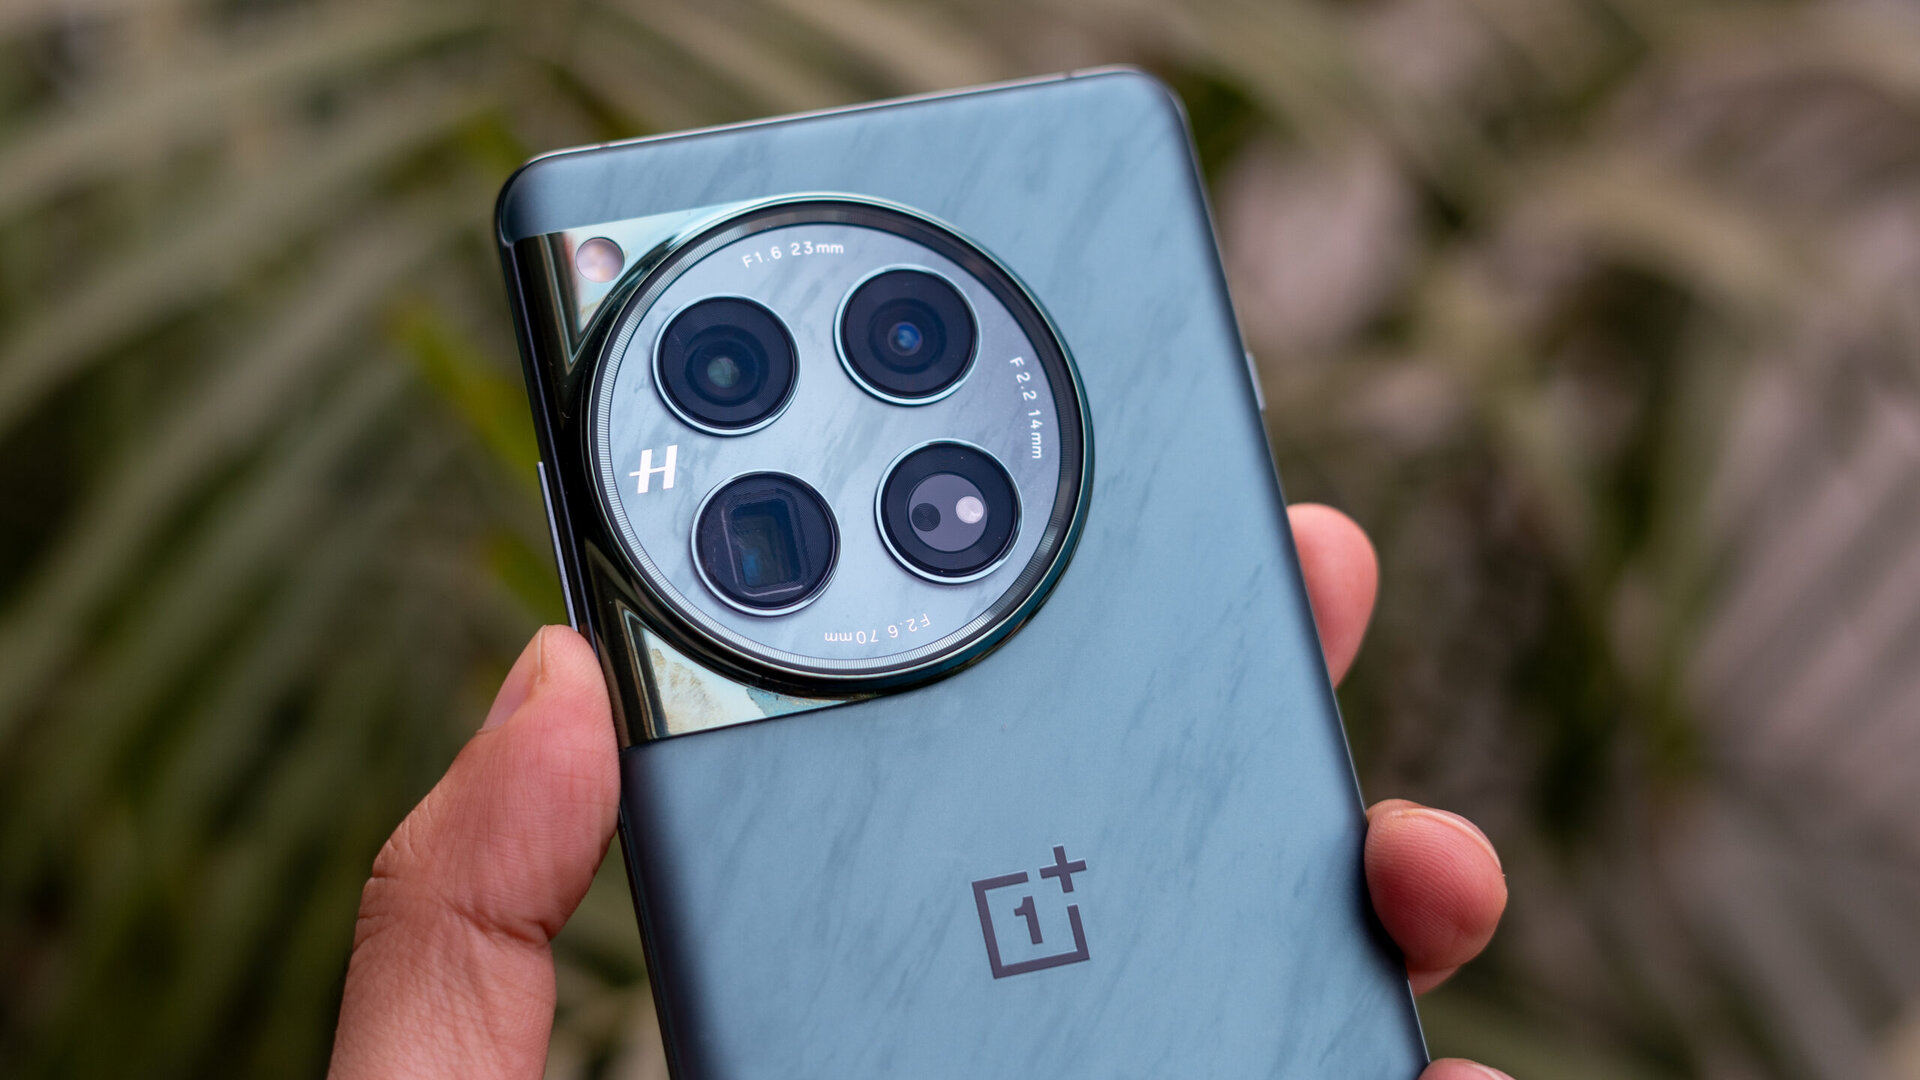 OnePlus 12 gets its first update adding Hasselblad Master mode (Update: Download link)